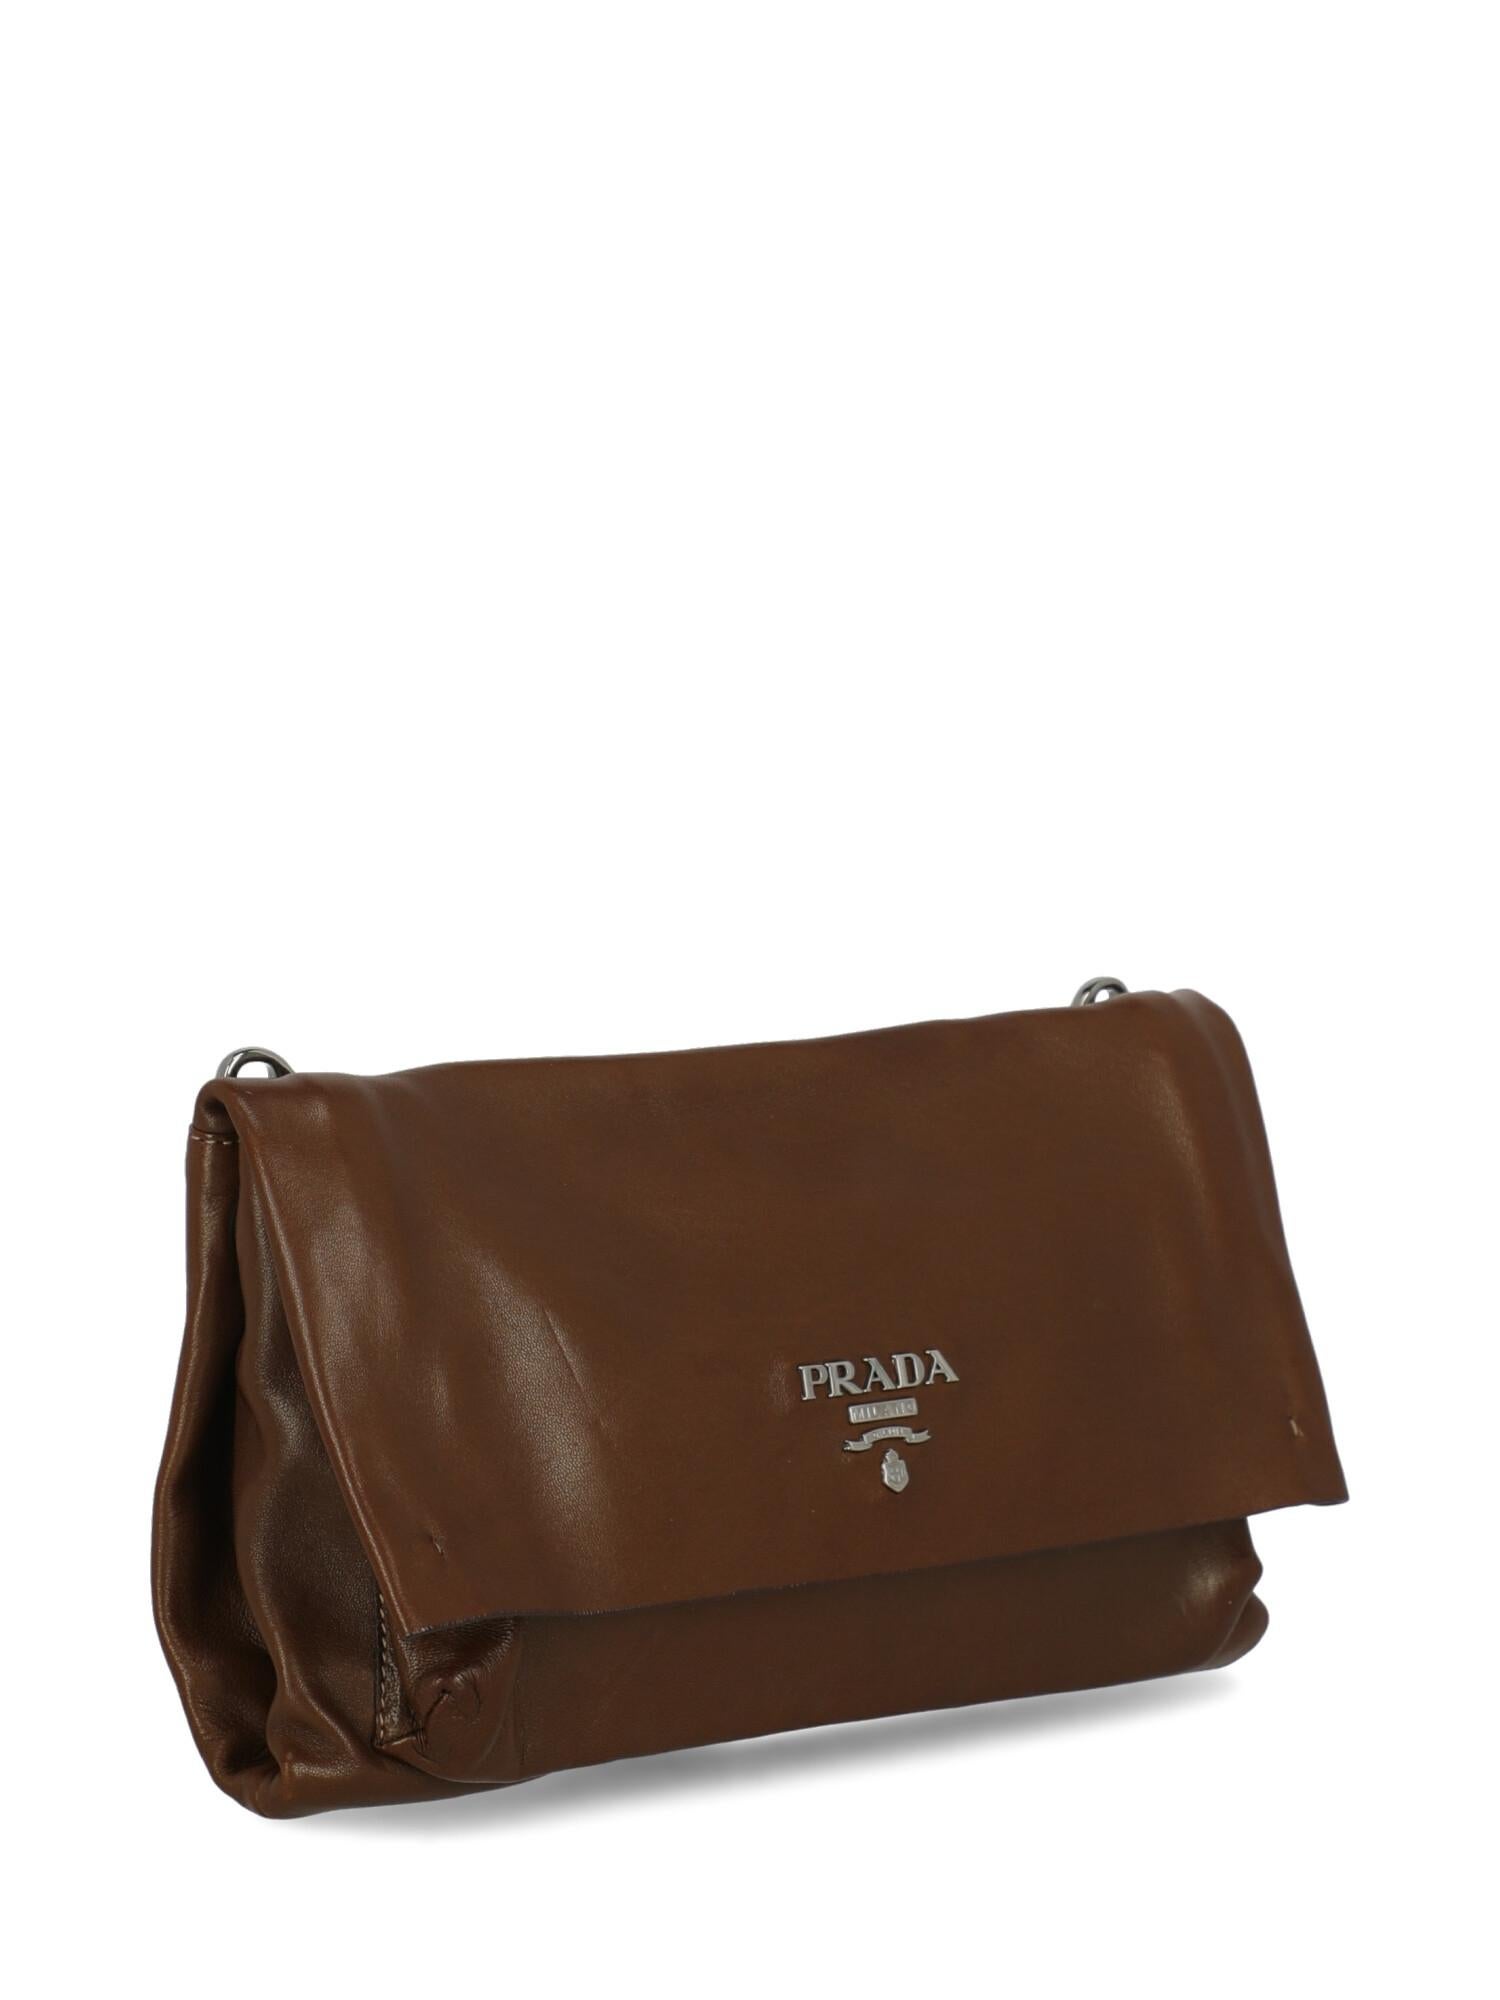 Prada Woman Shoulder bag  Brown Leather In Excellent Condition For Sale In Milan, IT